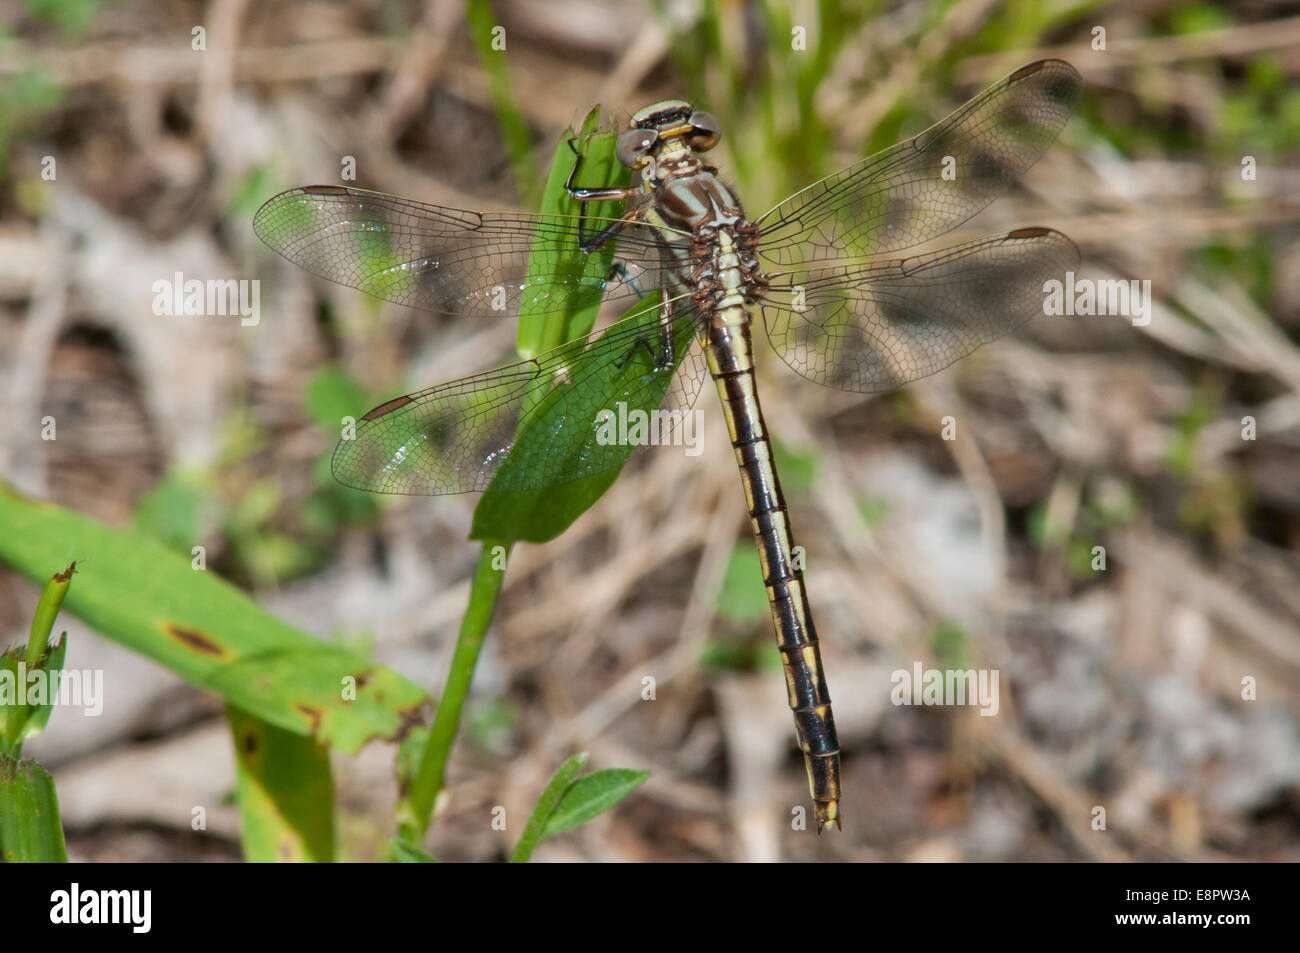 Dusky Clubtail perched on a plant. Stock Photo